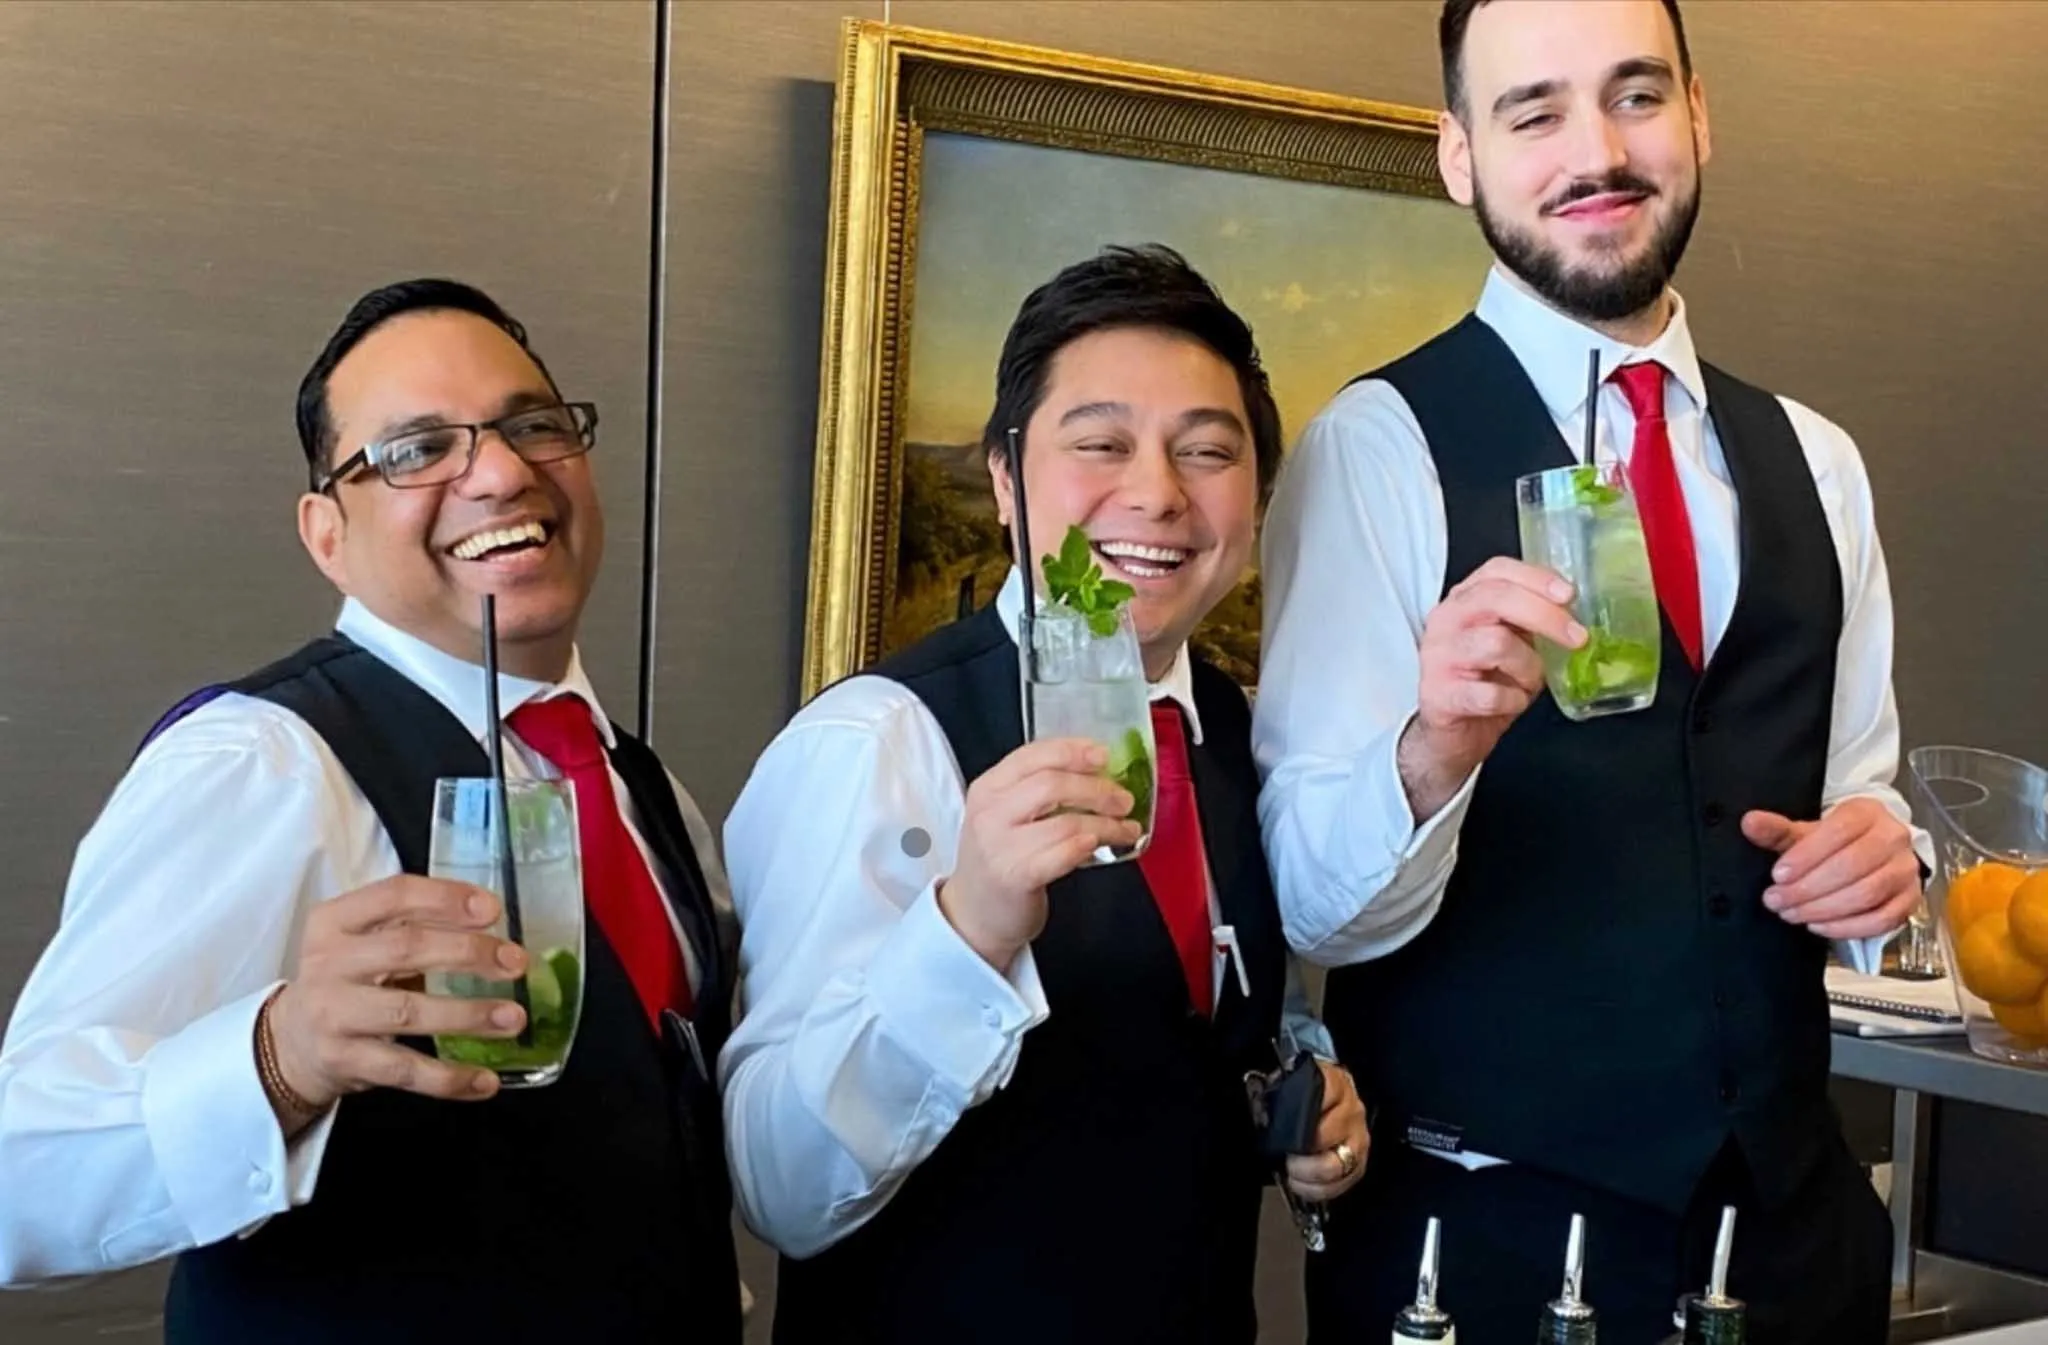 Three men wearing black vests and white shirts are holding drinks.